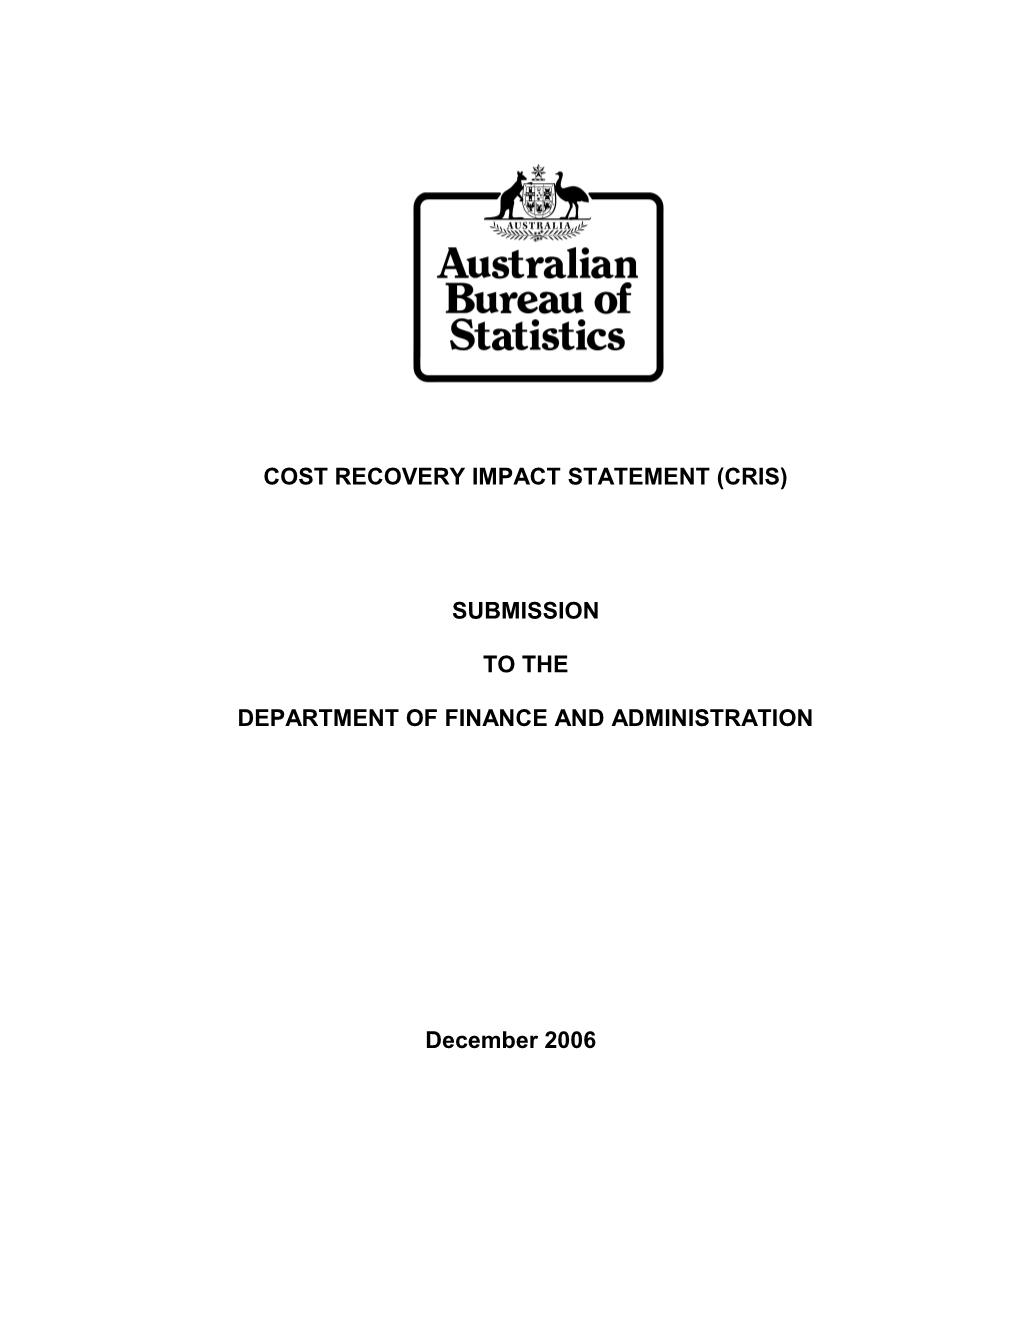 Cost Recovery Impact Statement (Cris)